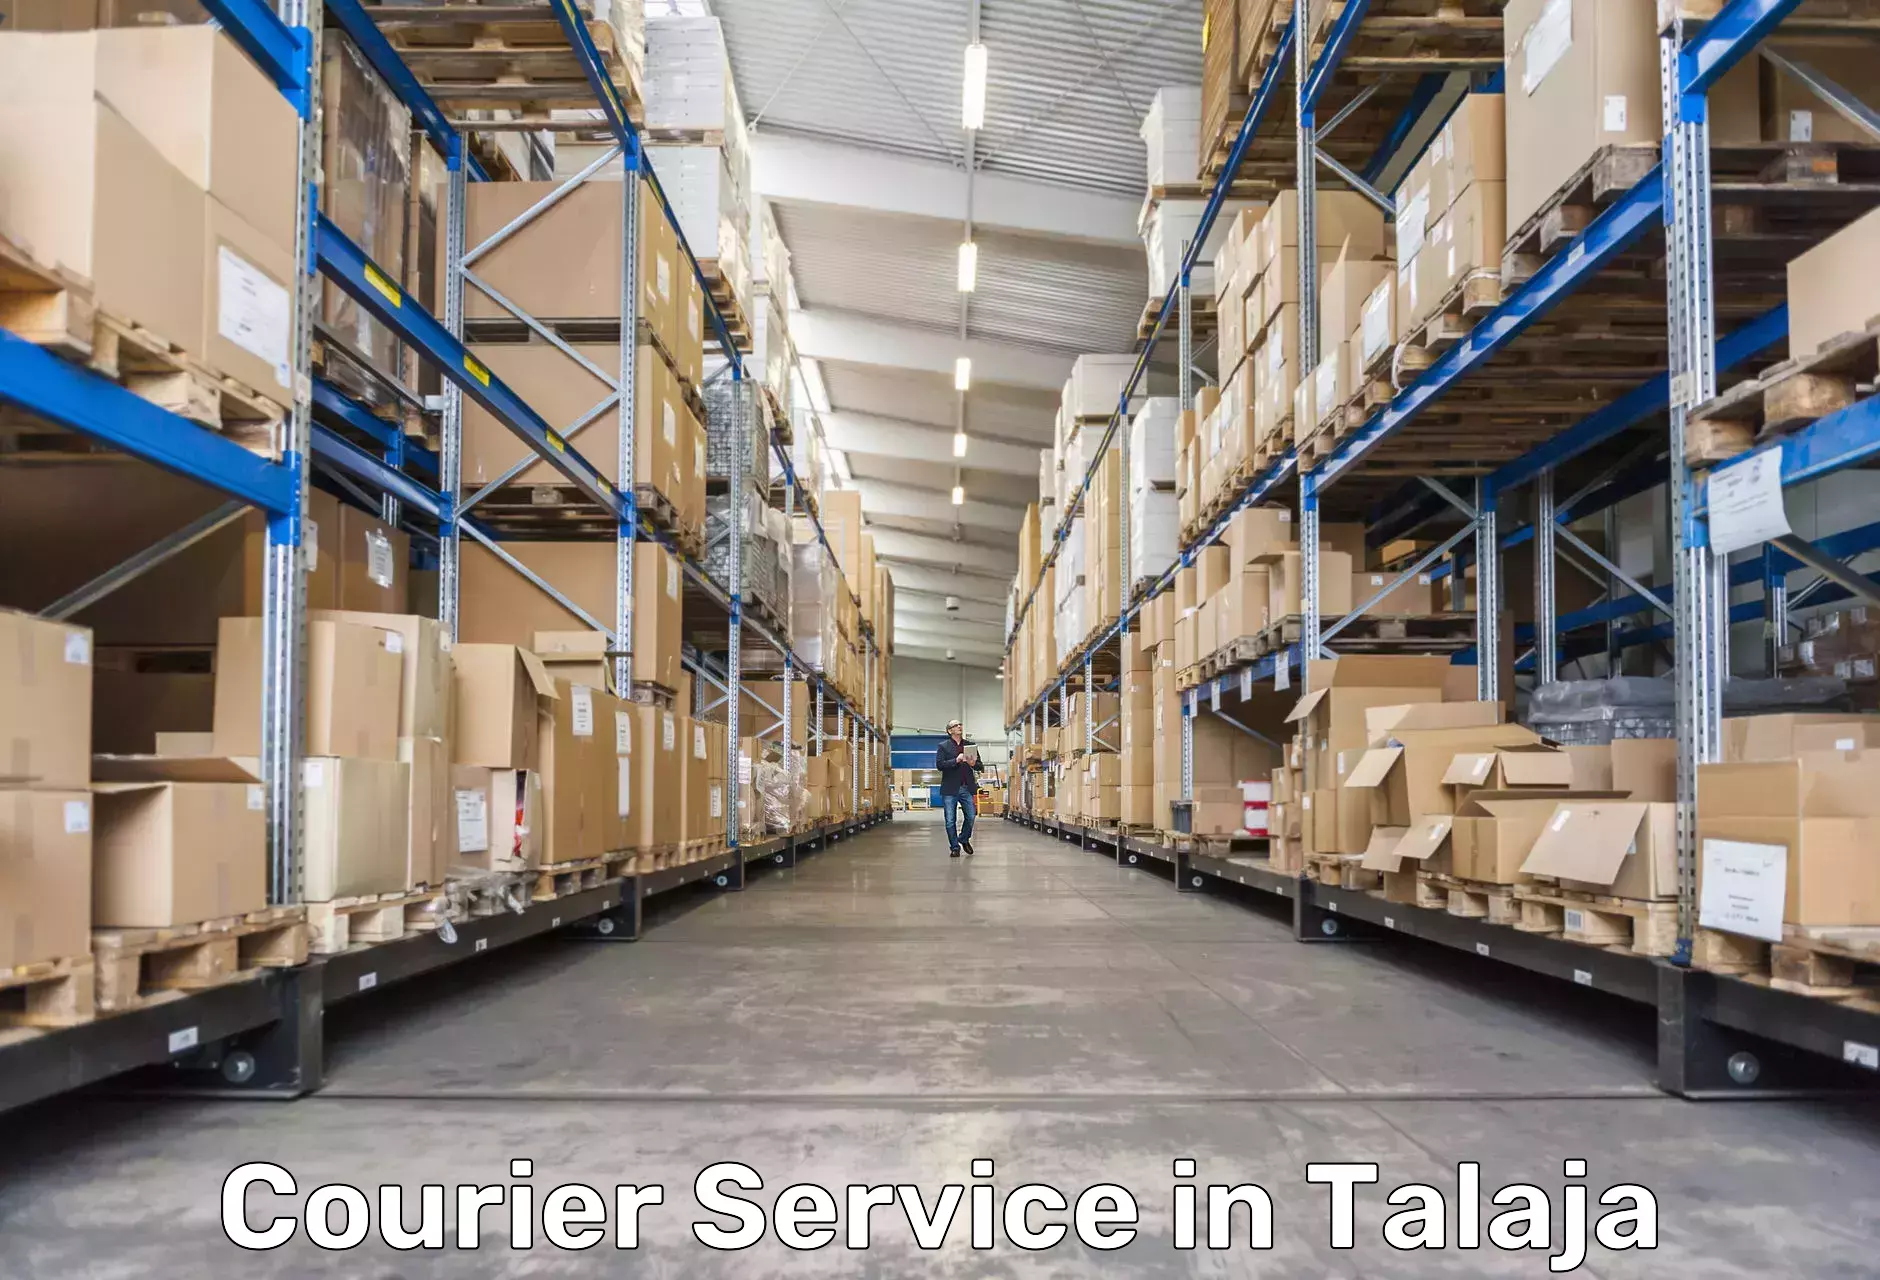 Customer-focused courier in Talaja